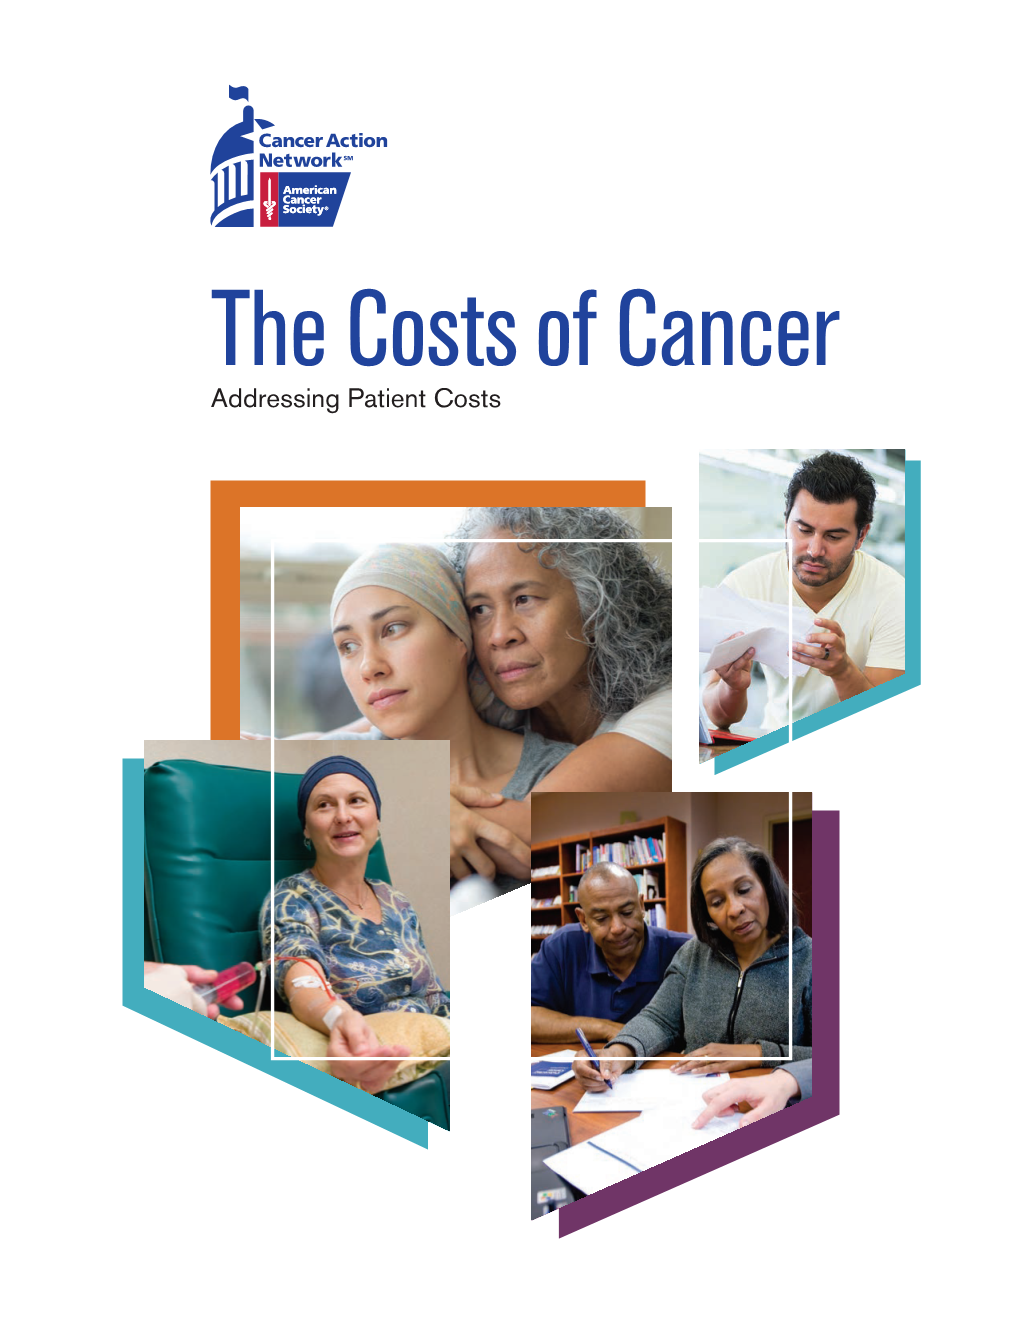 The Costs of Cancer Addressing Patient Costs Introduction